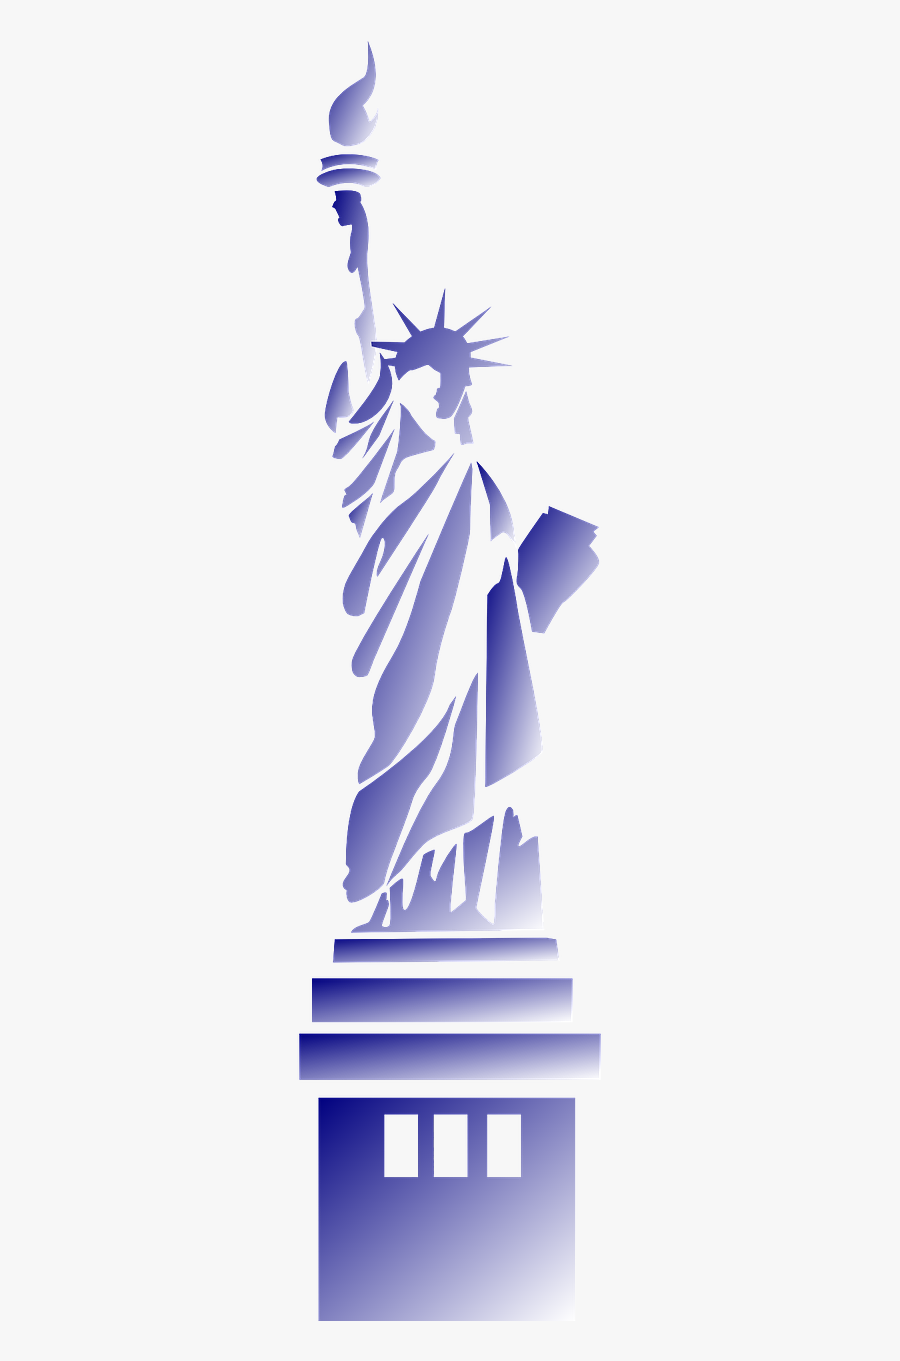 Statue Of Liberty Black And White Png, Transparent Clipart